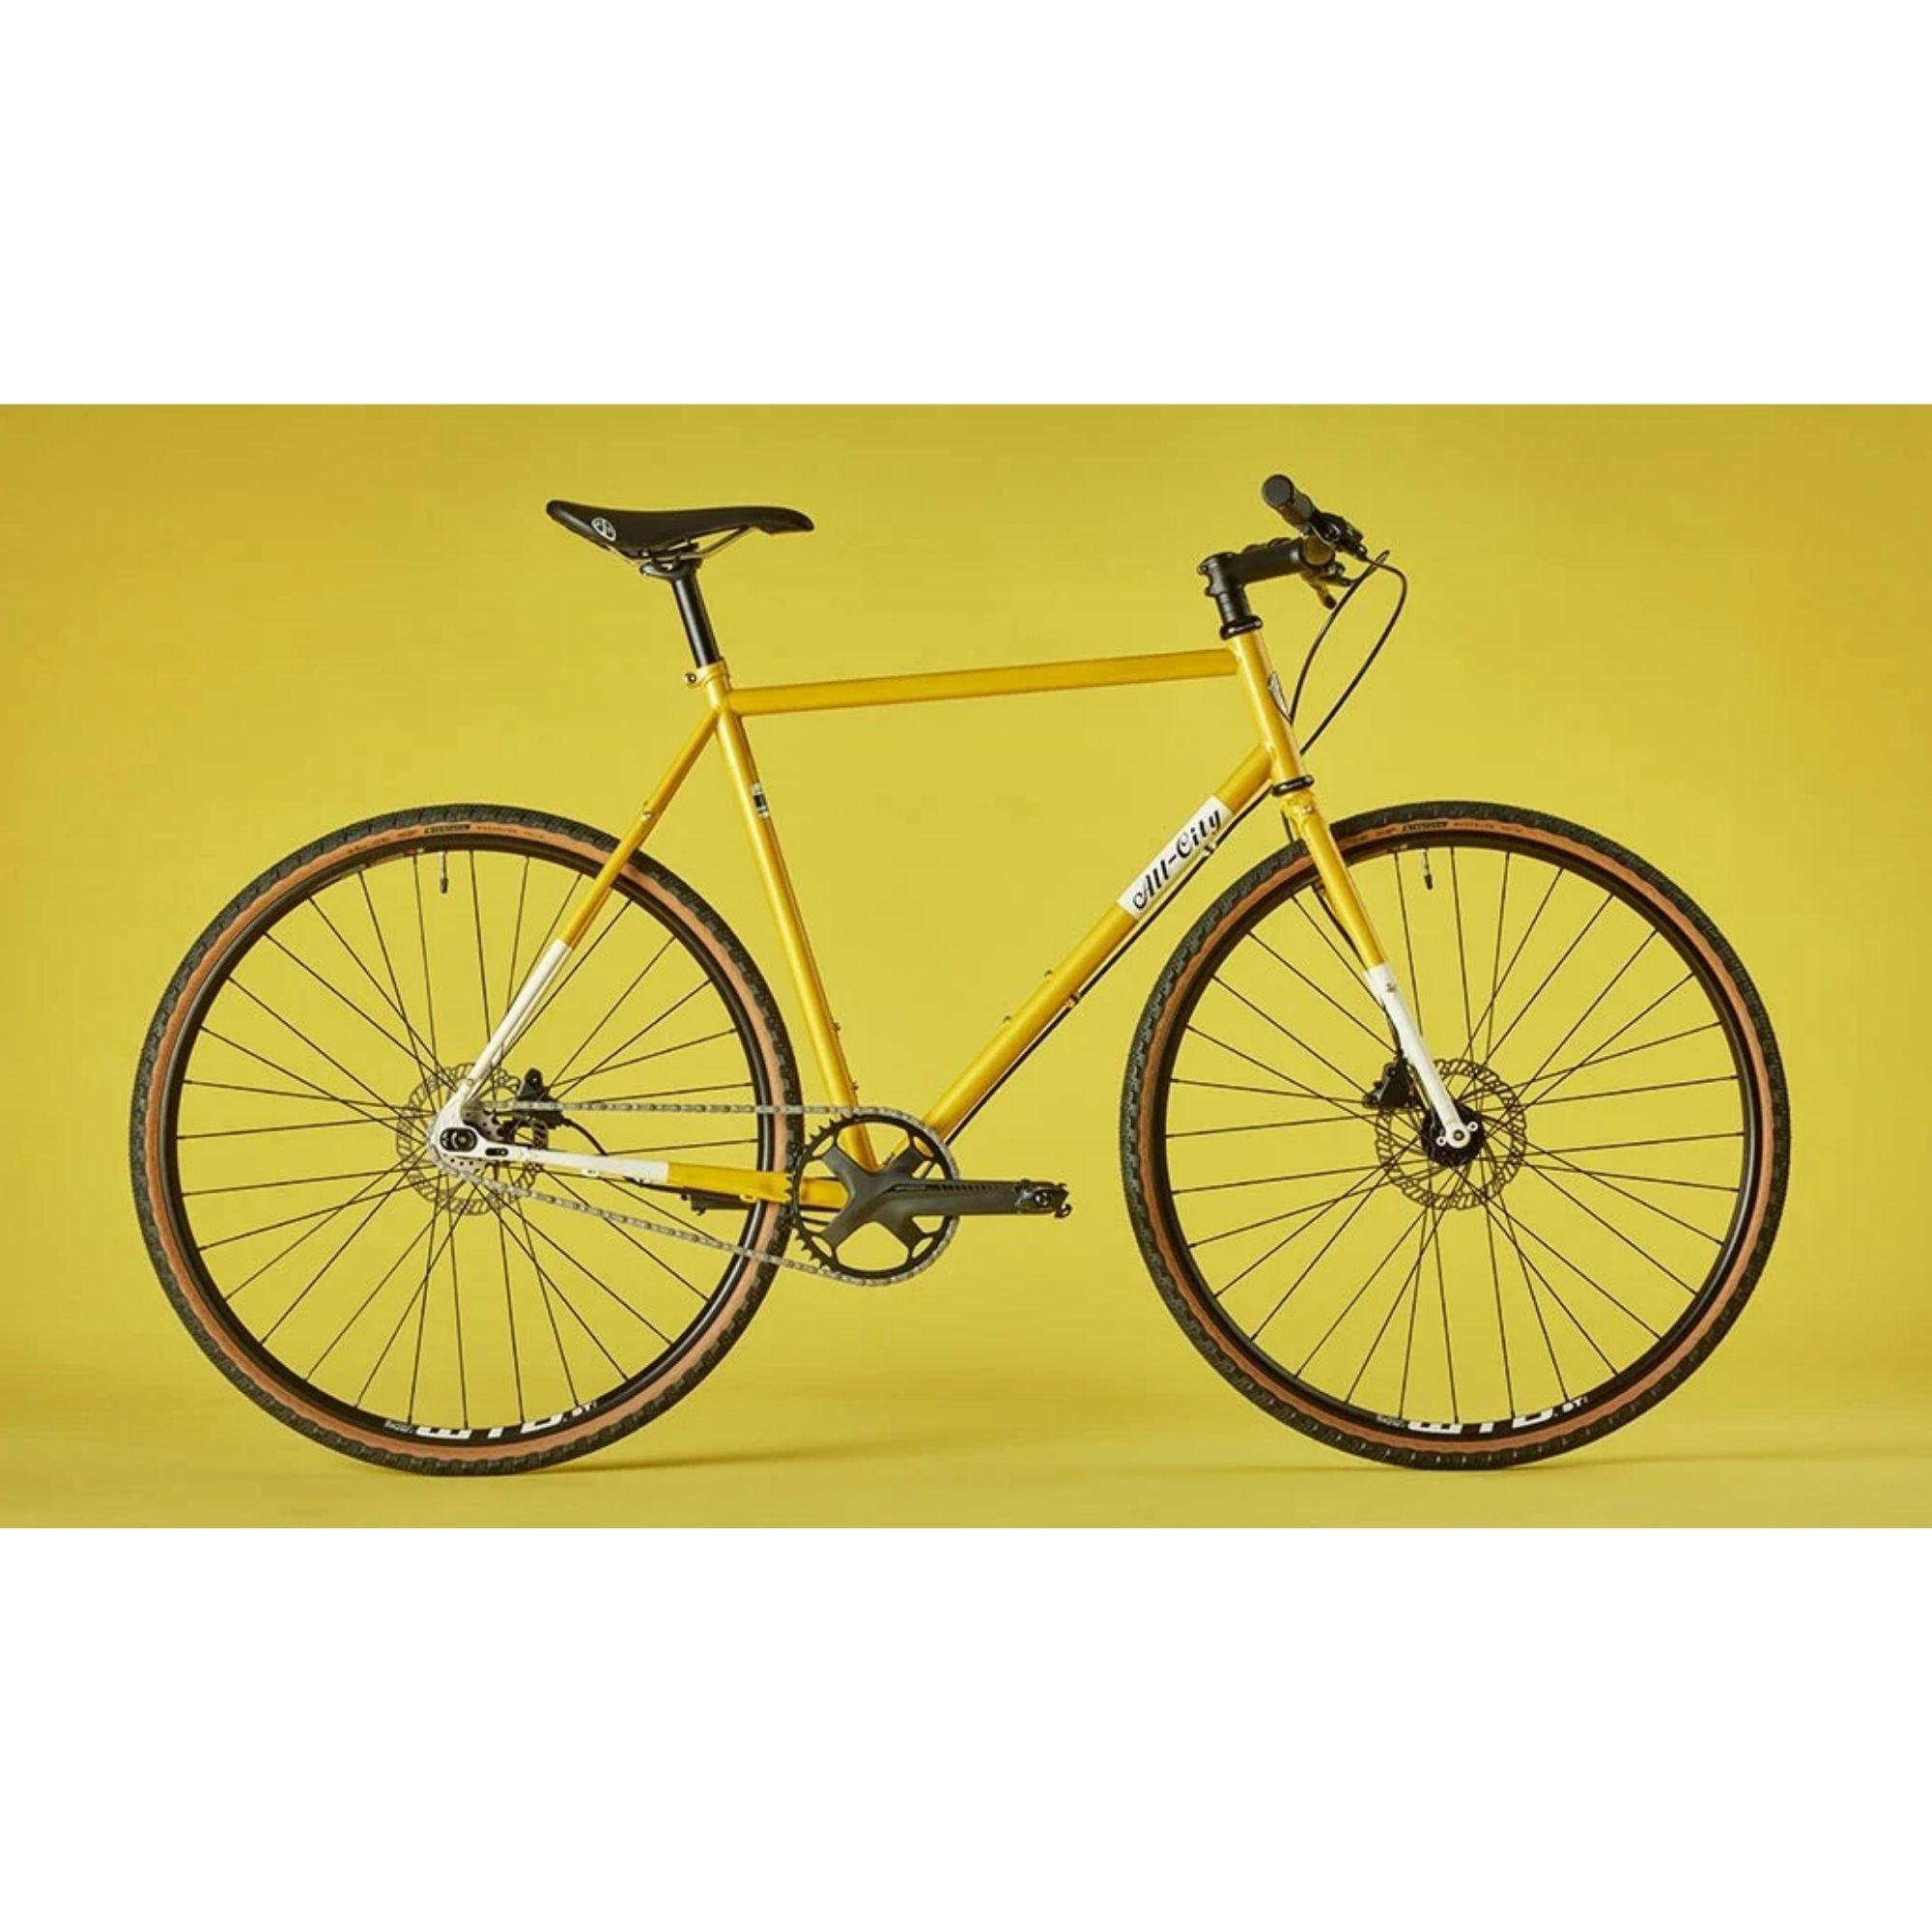 ALL-CITY Super Professional Single Speed